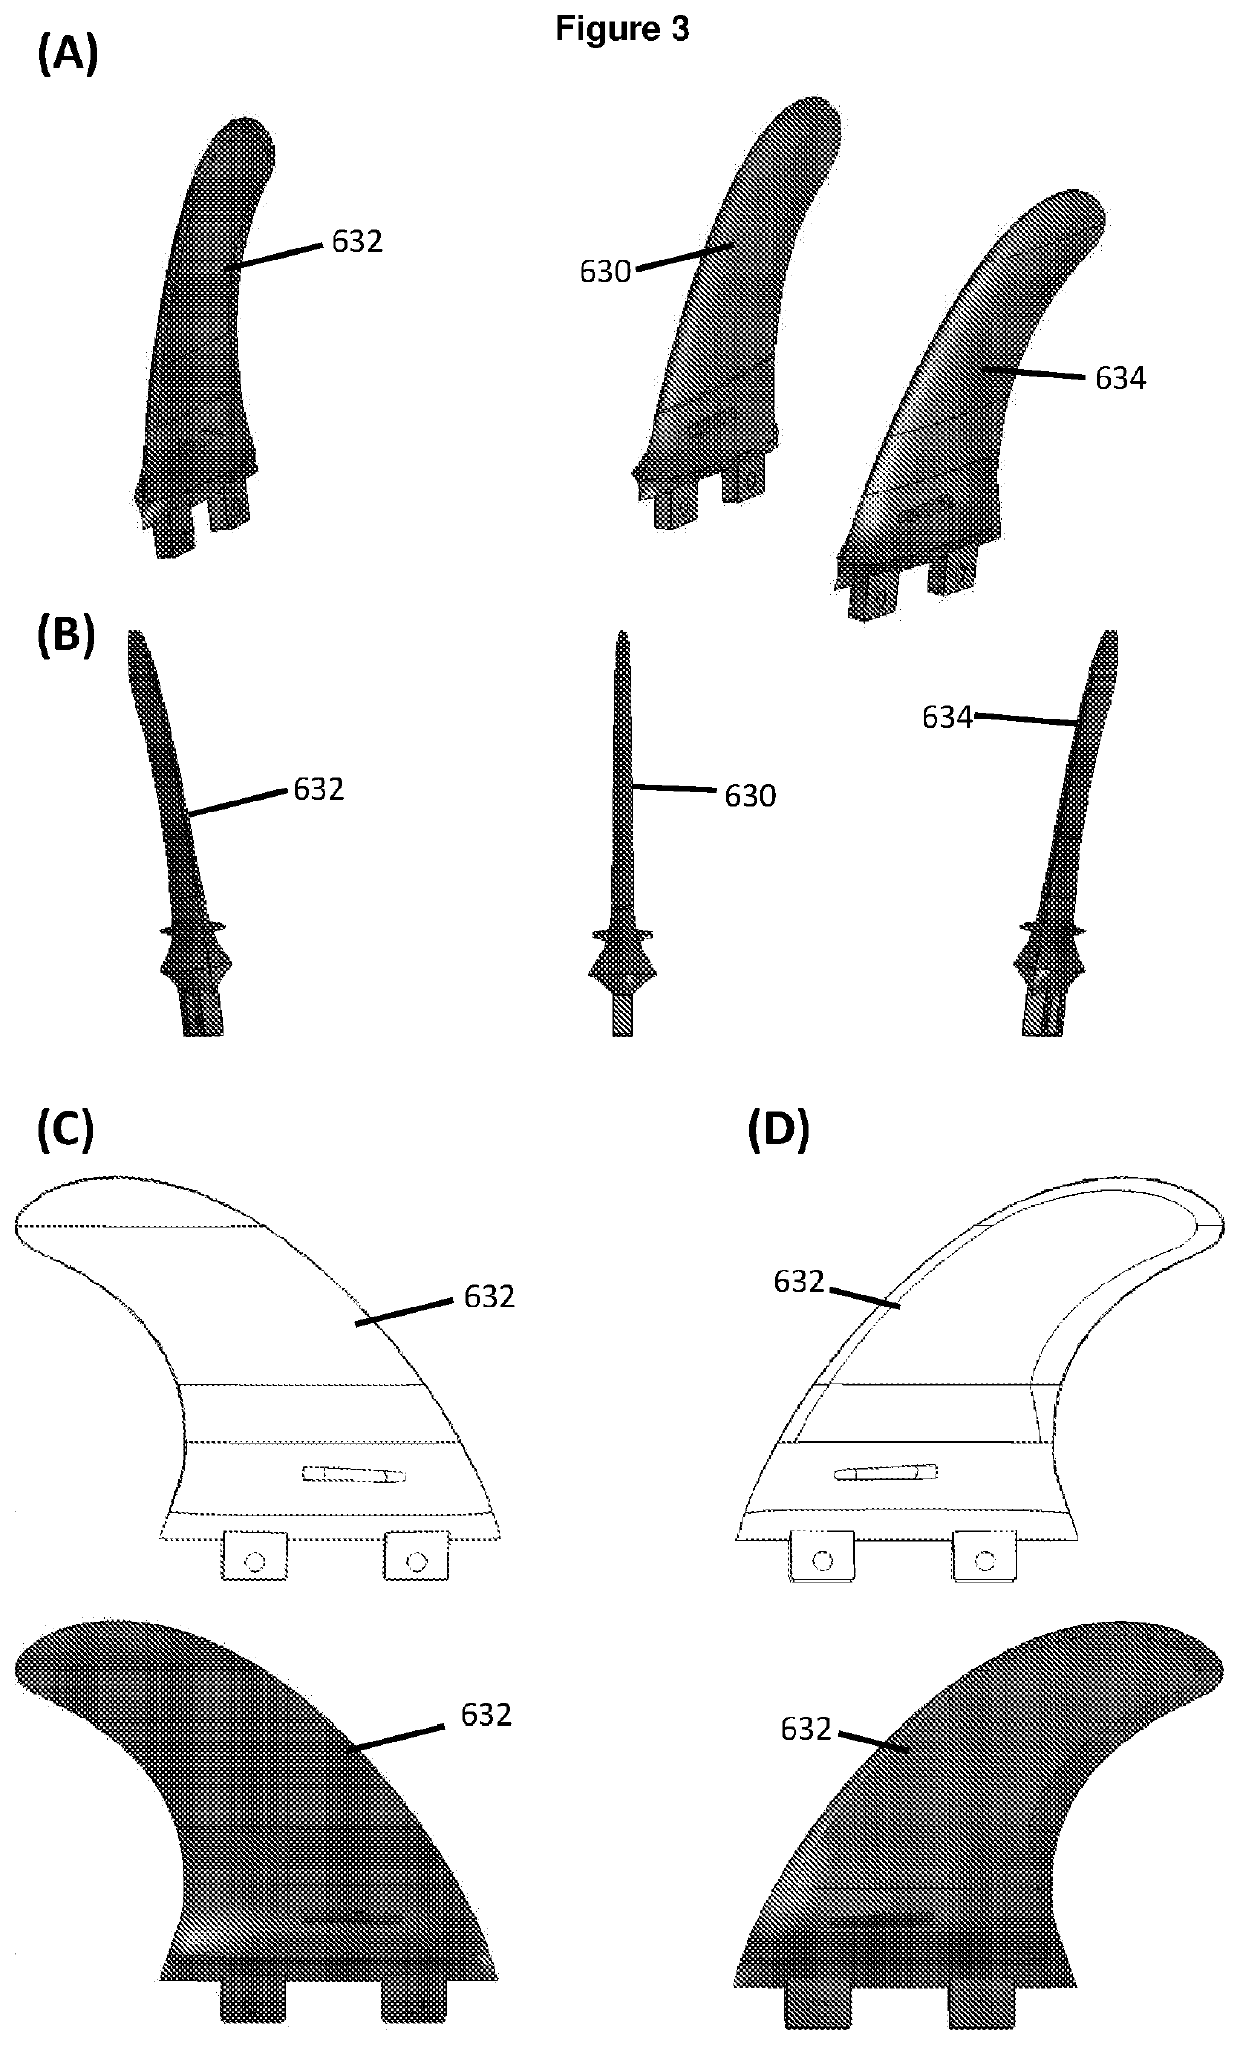 Fins with improved fluid dynamic properties